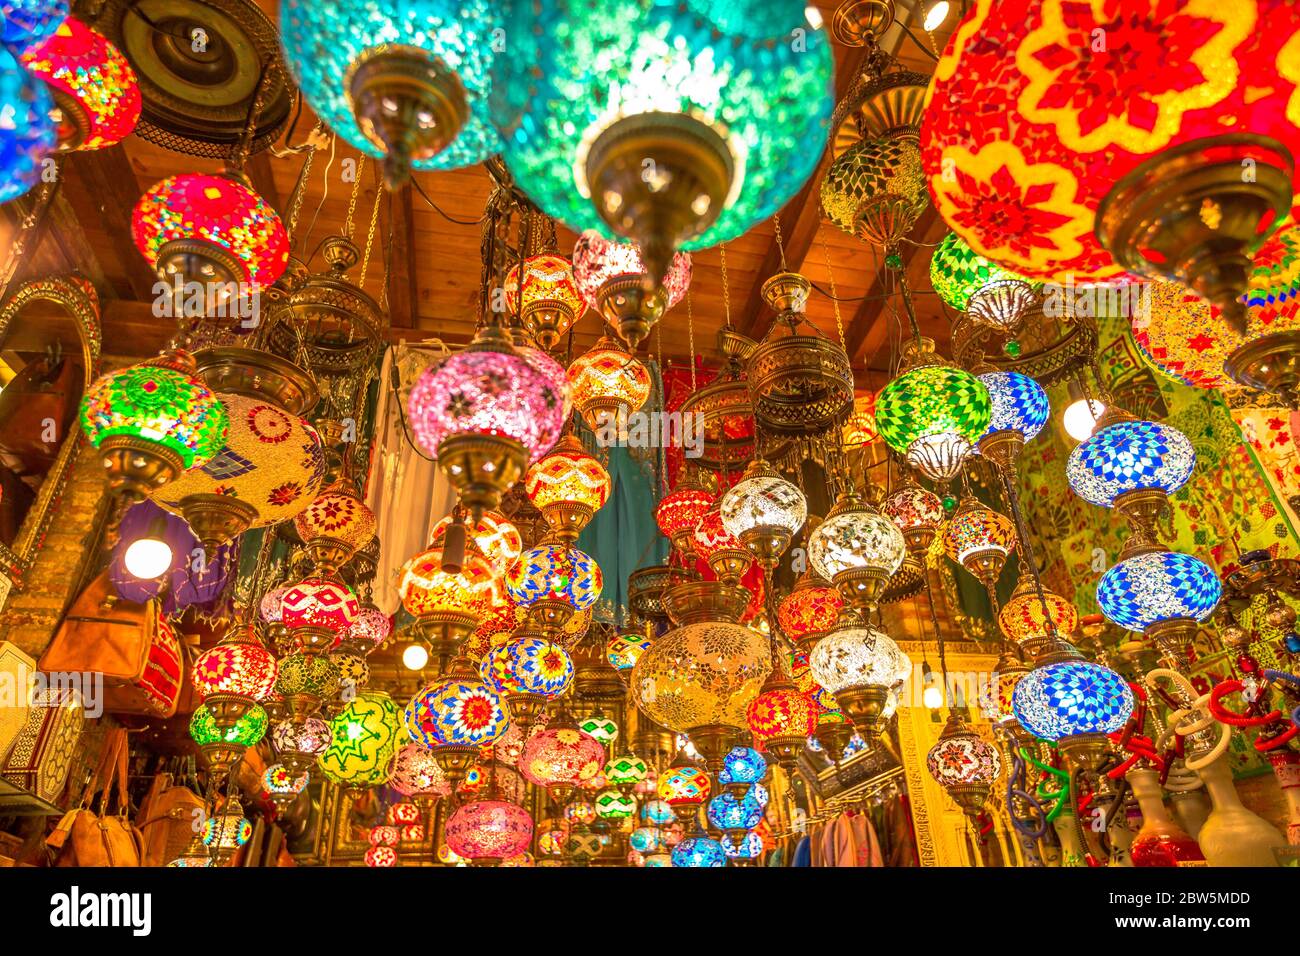 Colorful ceiling chandelier in Arab and Moroccan style. Lanterns lamp hanging down from the ceiling. Stock Photo